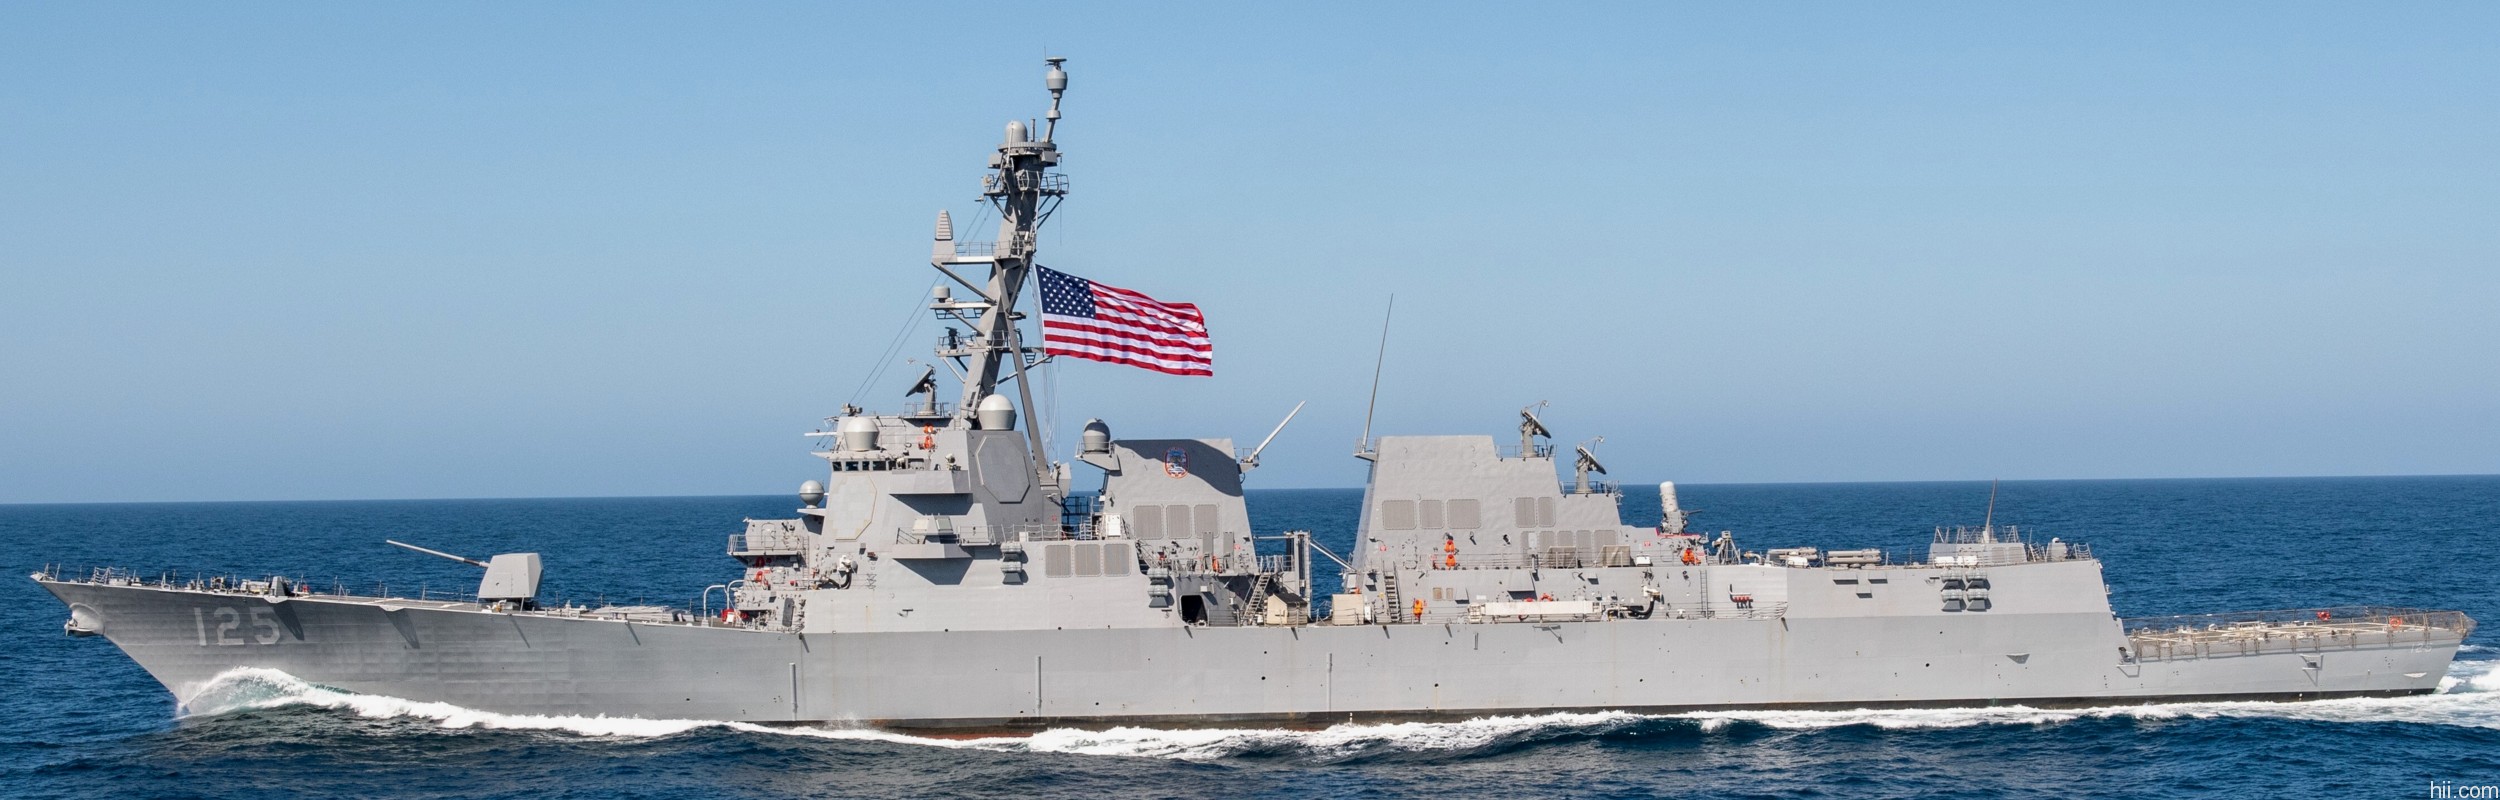 ddg-125 uss jack h. lucas arleigh burke class guided missile destroyer aegis us navy acceptance trials 09